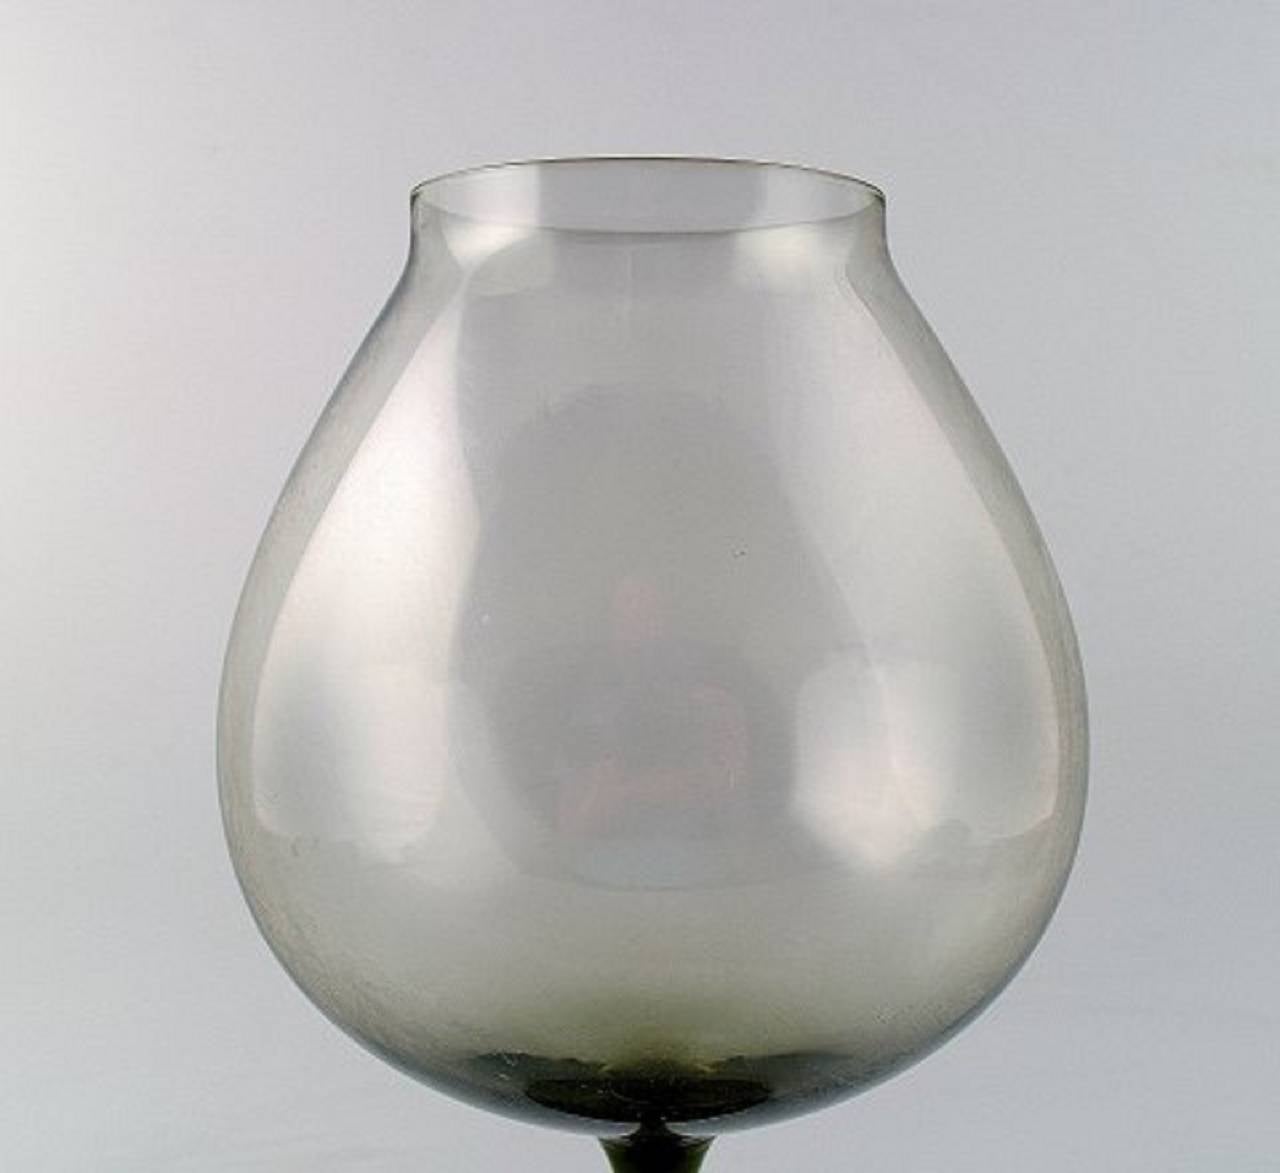 Nils Landberg, Orrefors, tulip glass. Grey-tinted glass. Label.
Measures: 29cm height. In perfect condition.